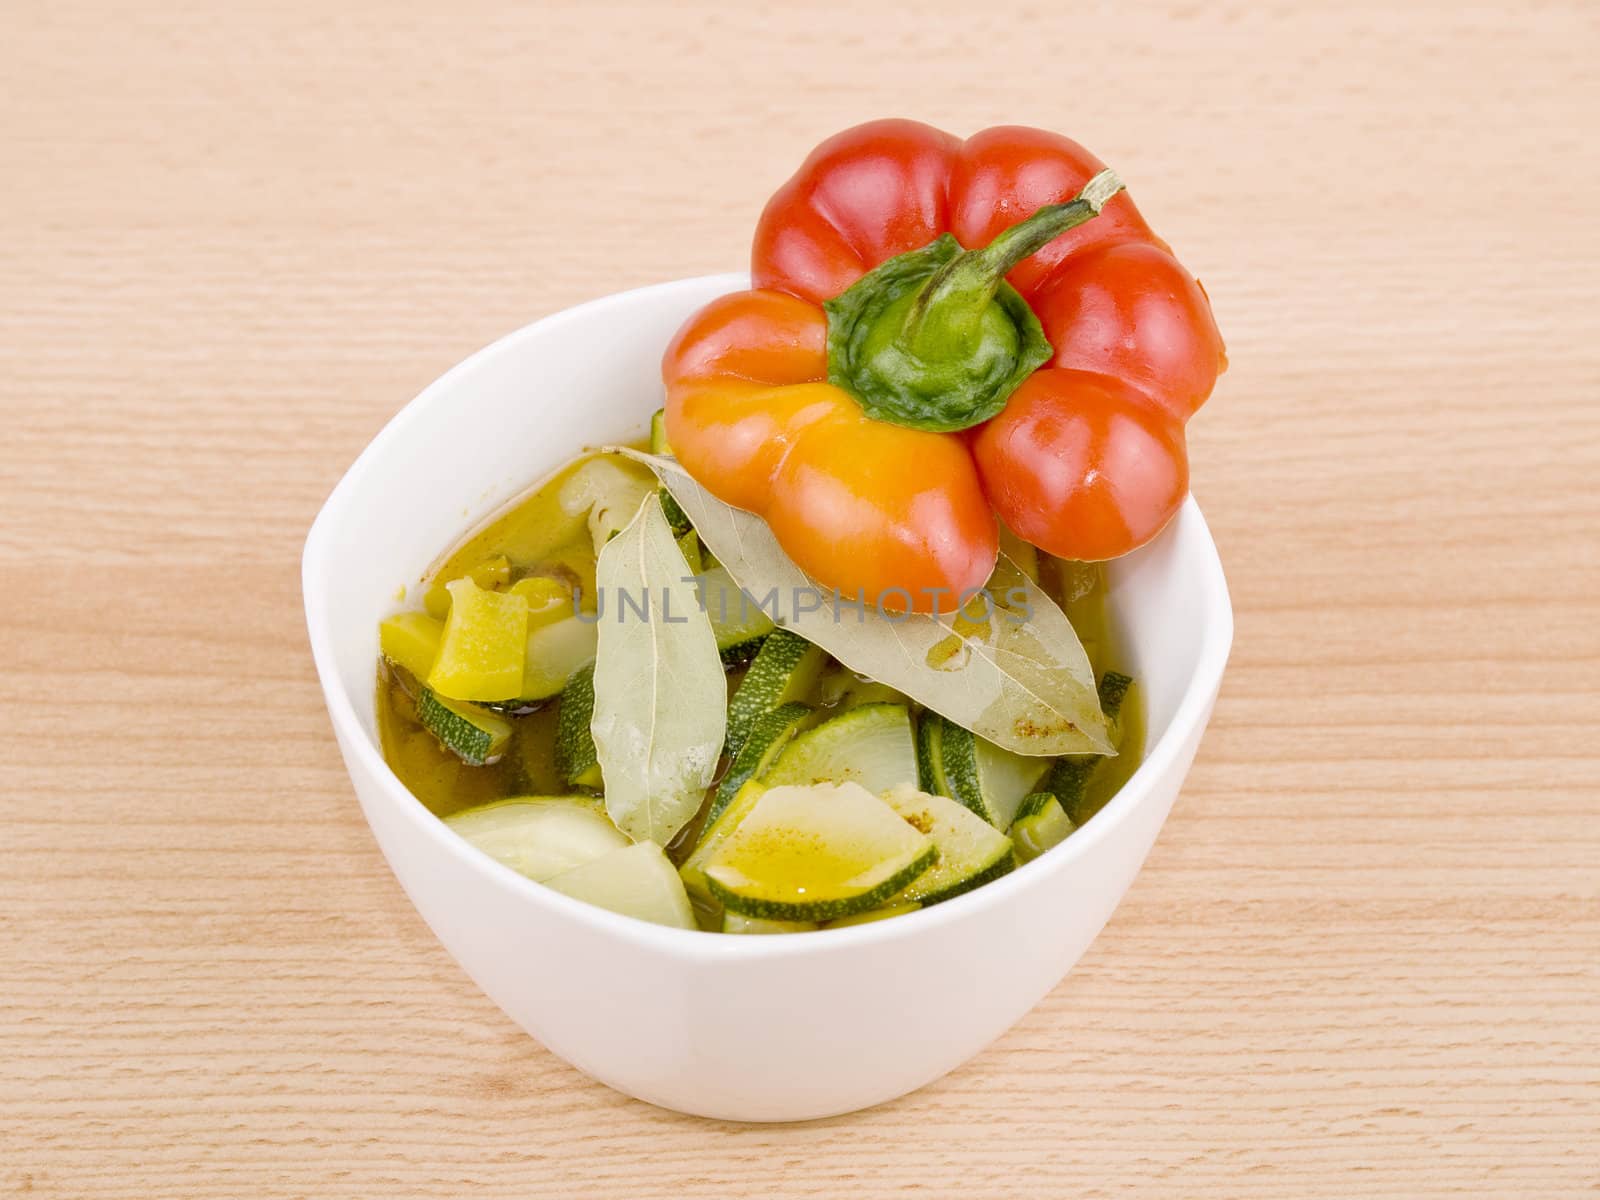 Delicious vegetarian soup made from zucchini and yellow paprika served in white porcelain bowl on wooden background